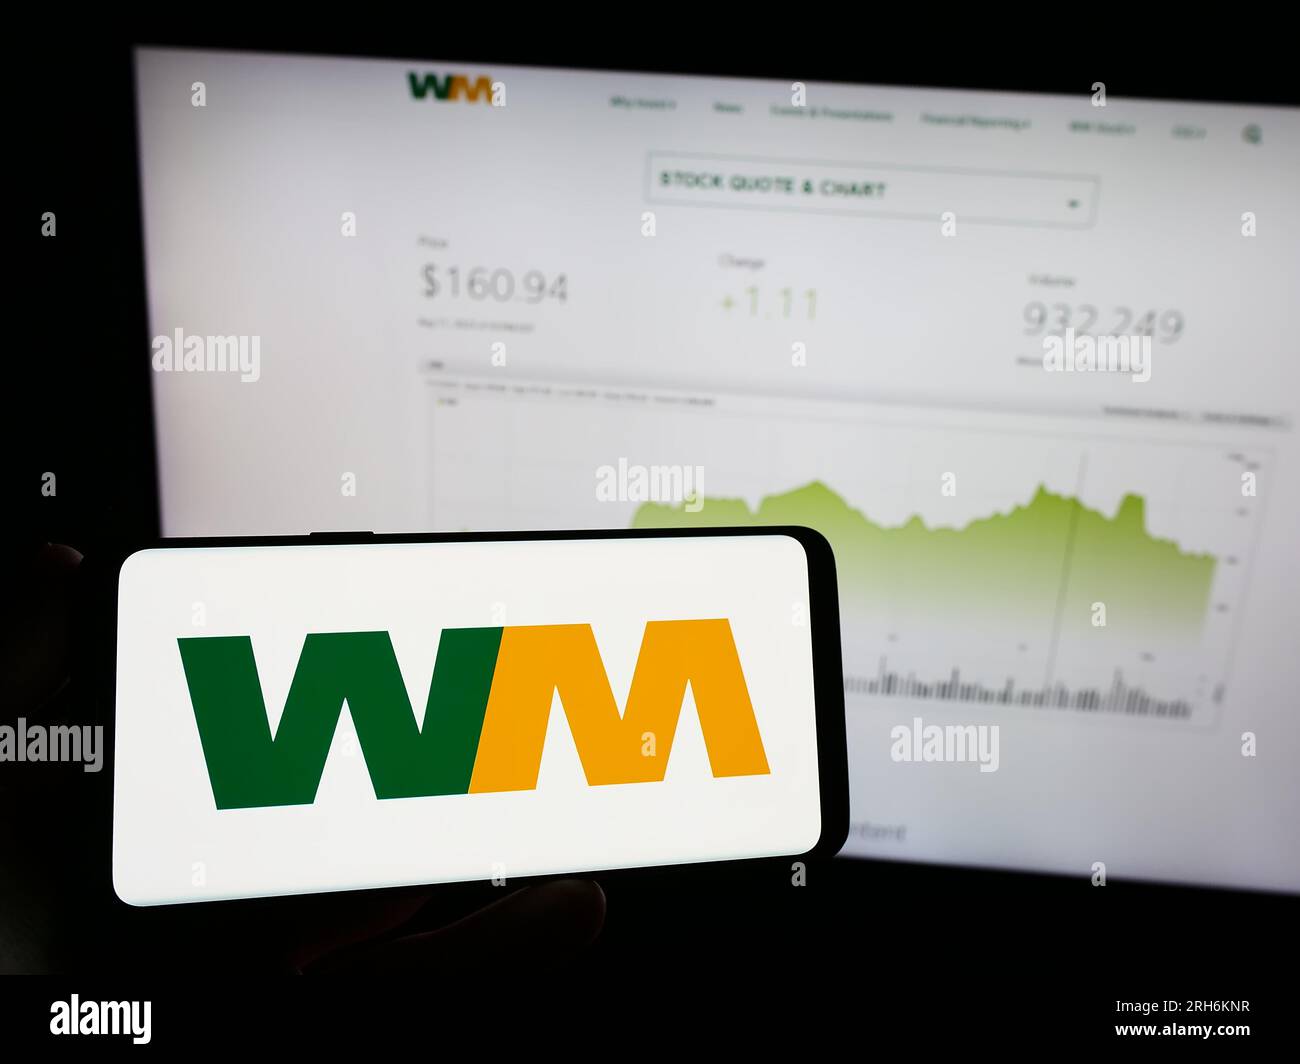 Person holding mobile phone with logo of American disposal company Waste Management Inc. on screen in front of web page. Focus on phone display. Stock Photo